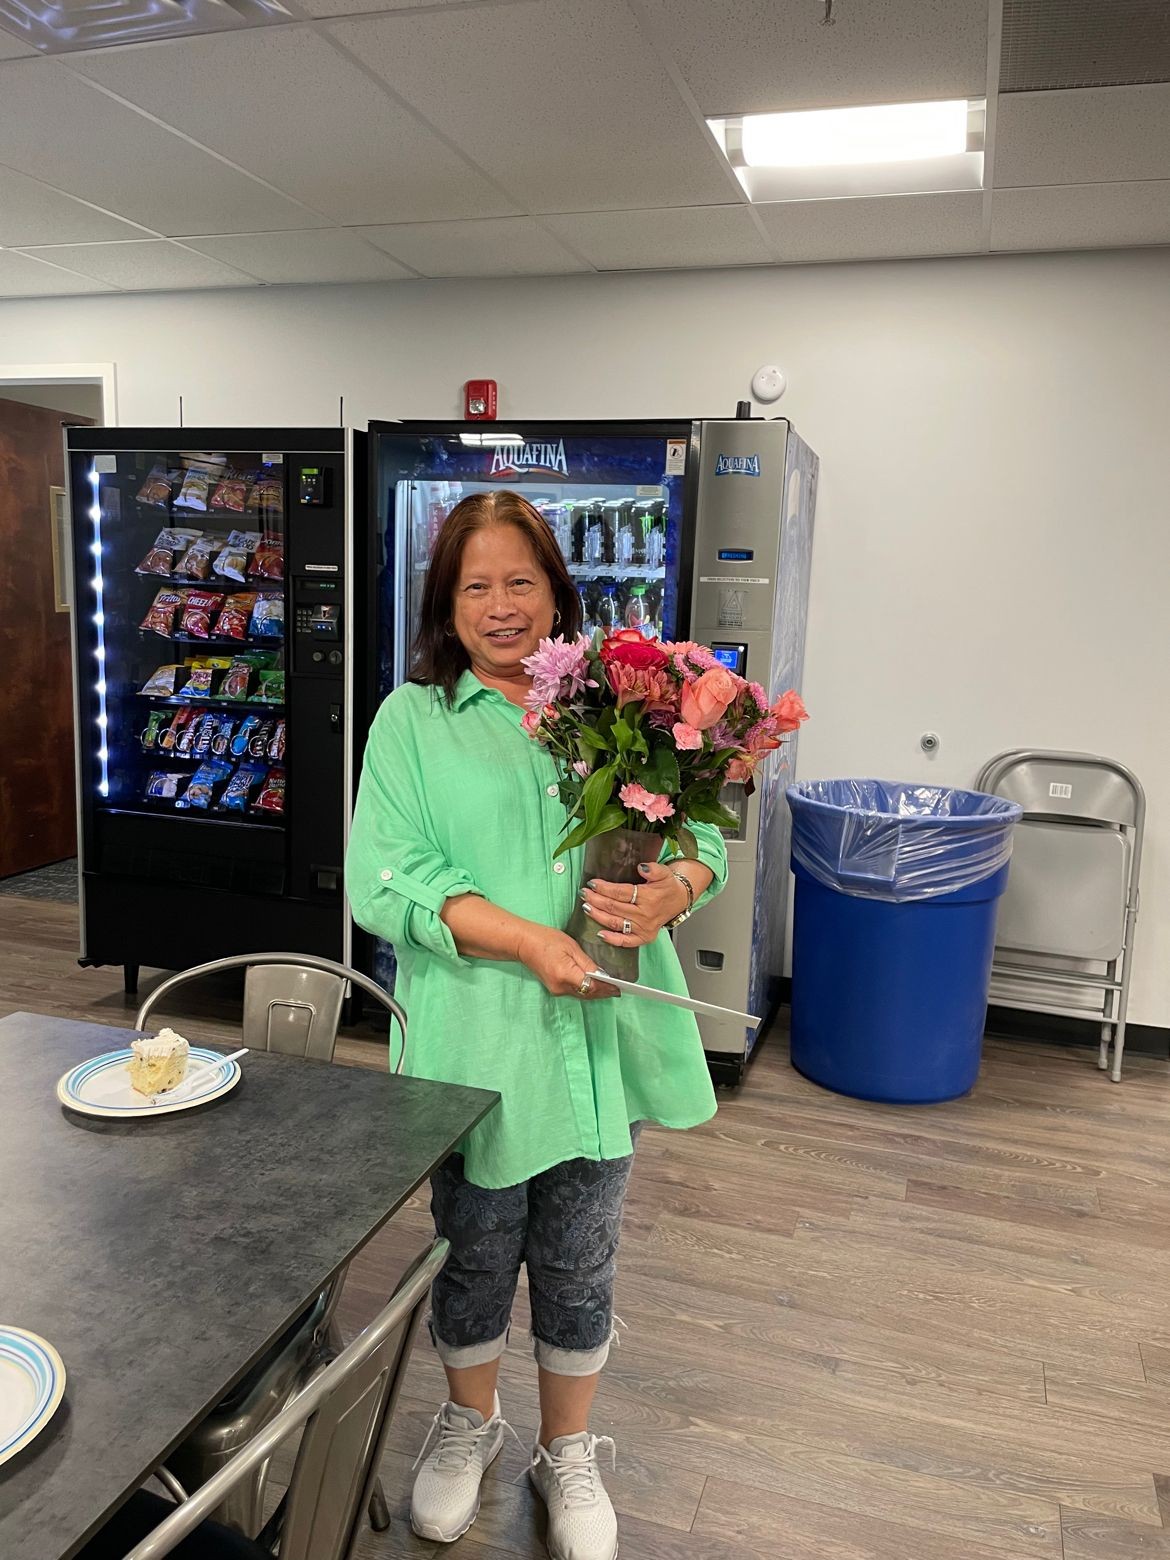  Congratulations to Maria on her 45th work anniversary!